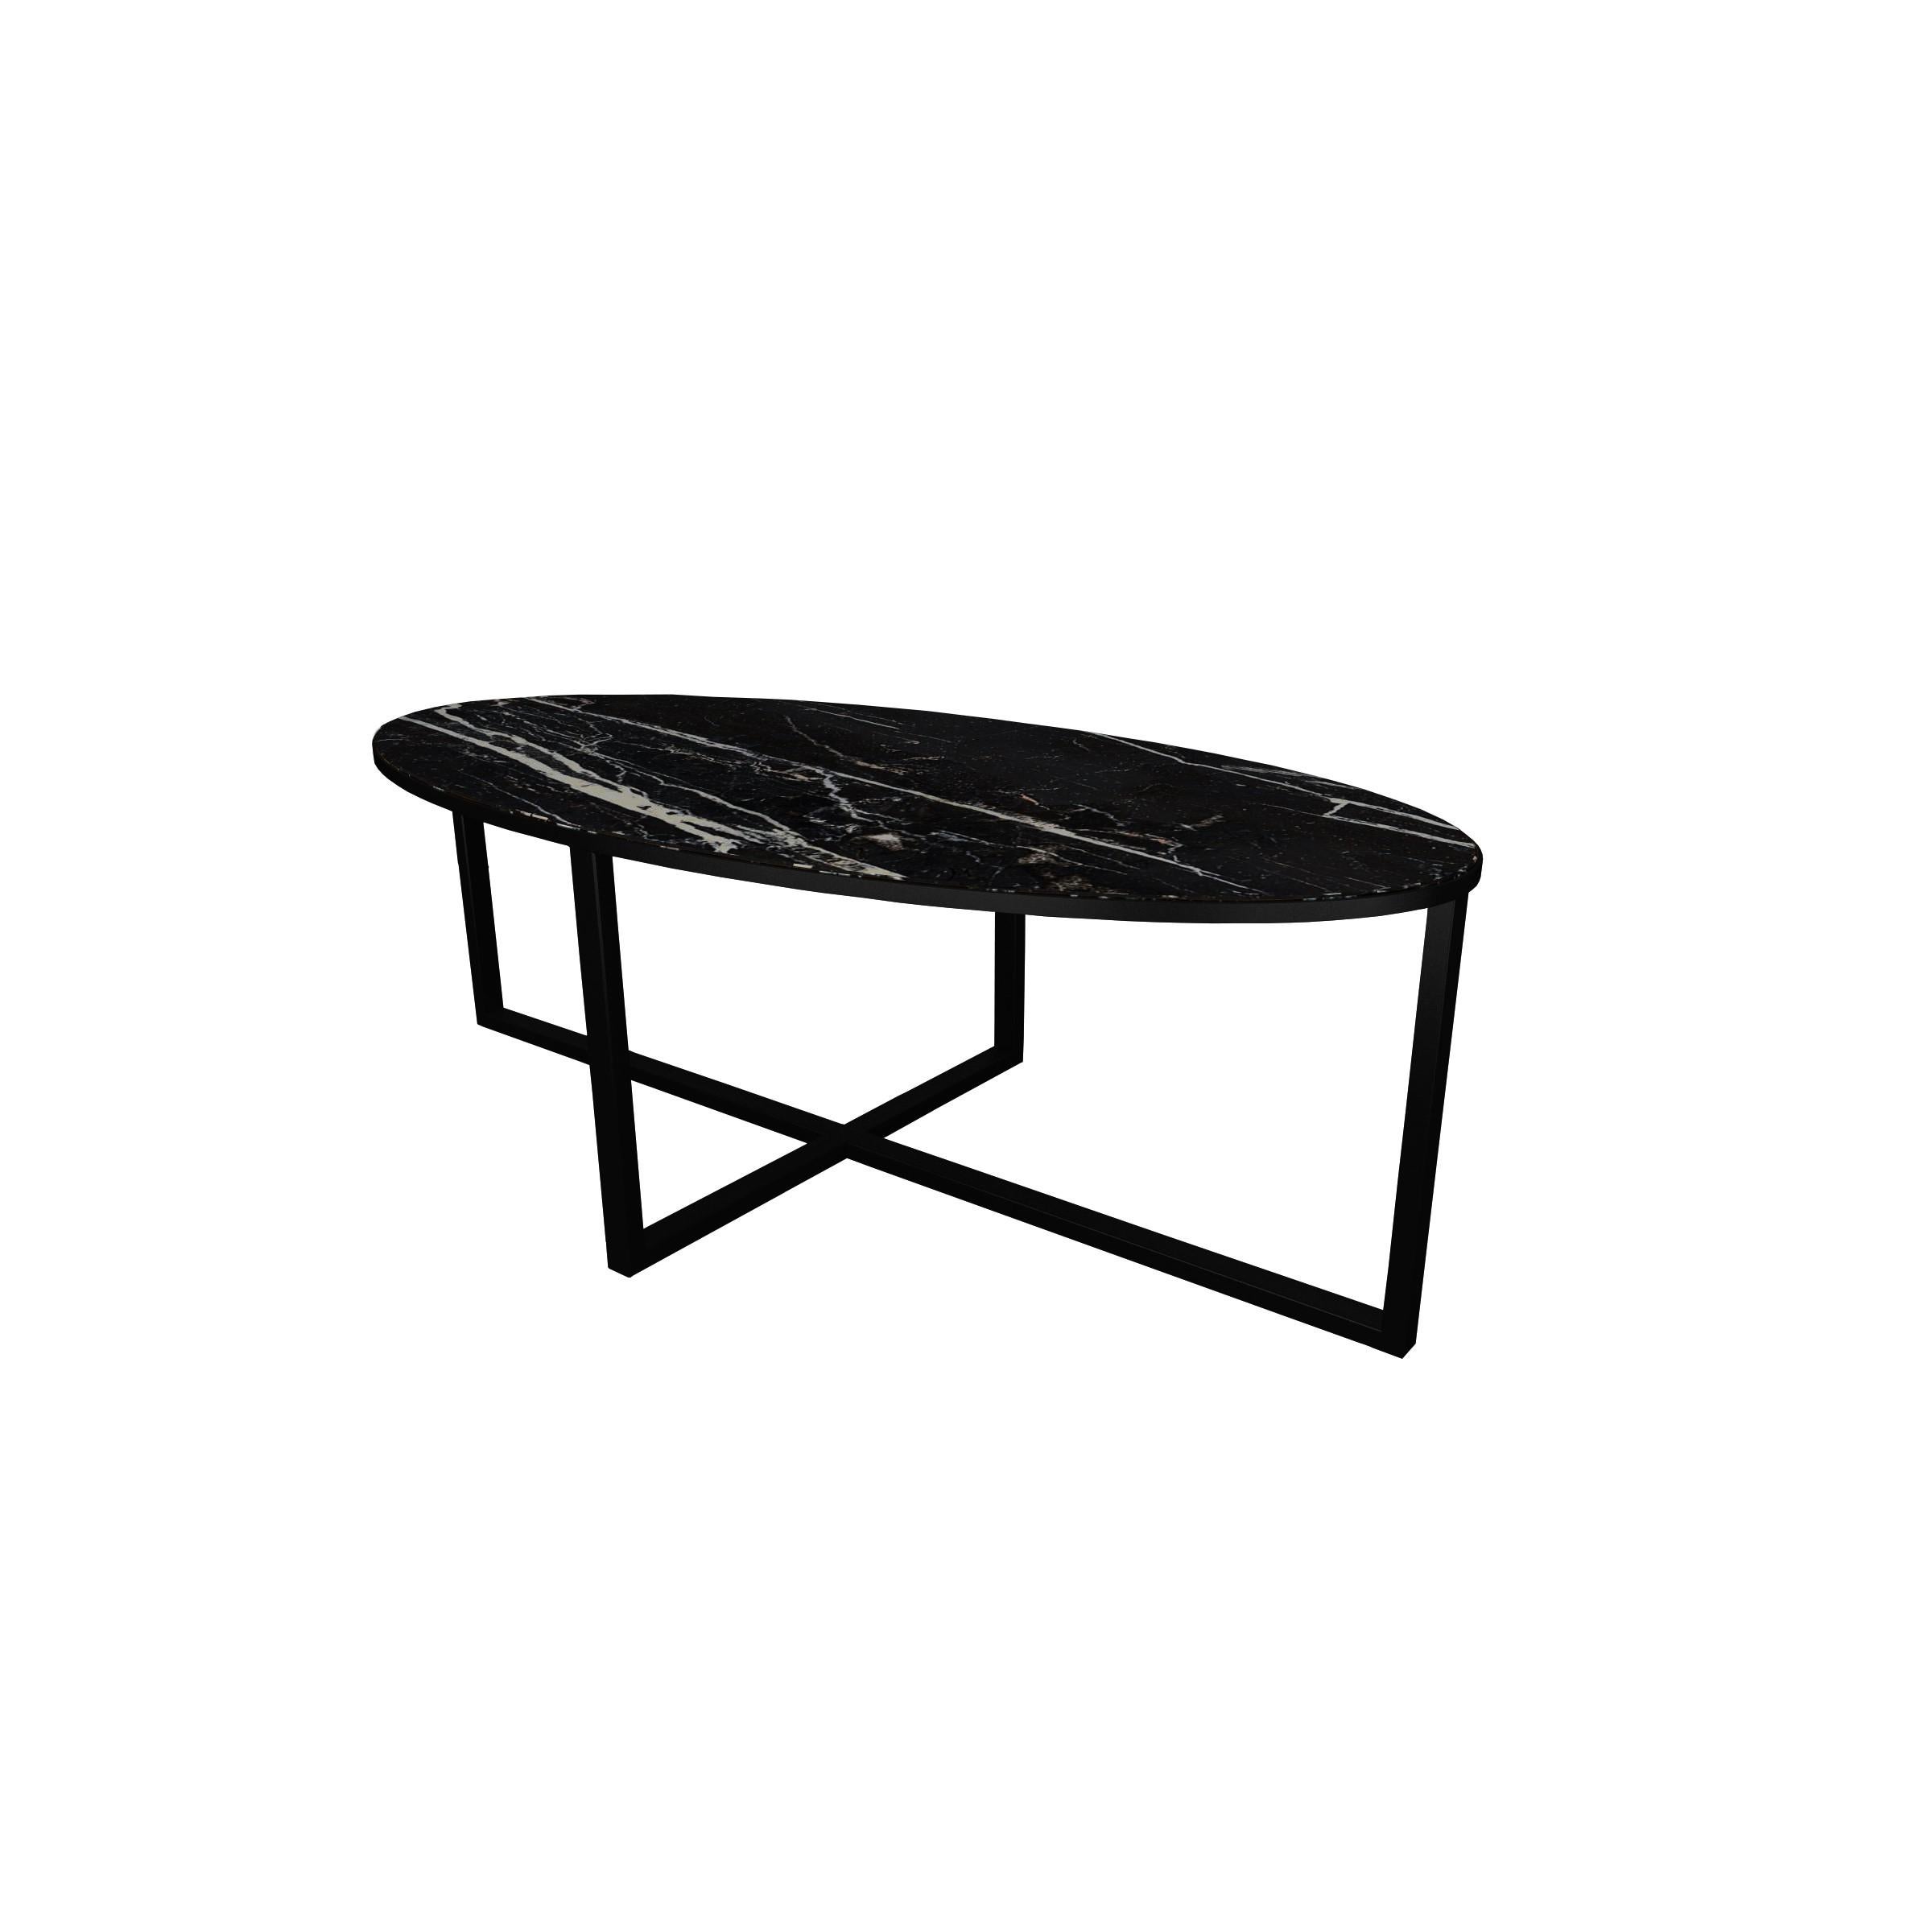 𝗣𝗿𝗼𝗱𝘂𝗰𝘁 𝗗𝗲𝘁𝗮𝗶𝗹𝘀:
NORDST MIA Coffee Oval Table from Italian Green Lightning Marble, Danish Modern Design, New

Cross-style frame going up to meet a marvellous and carefully selected marble piece that has been surrounded by the stylish